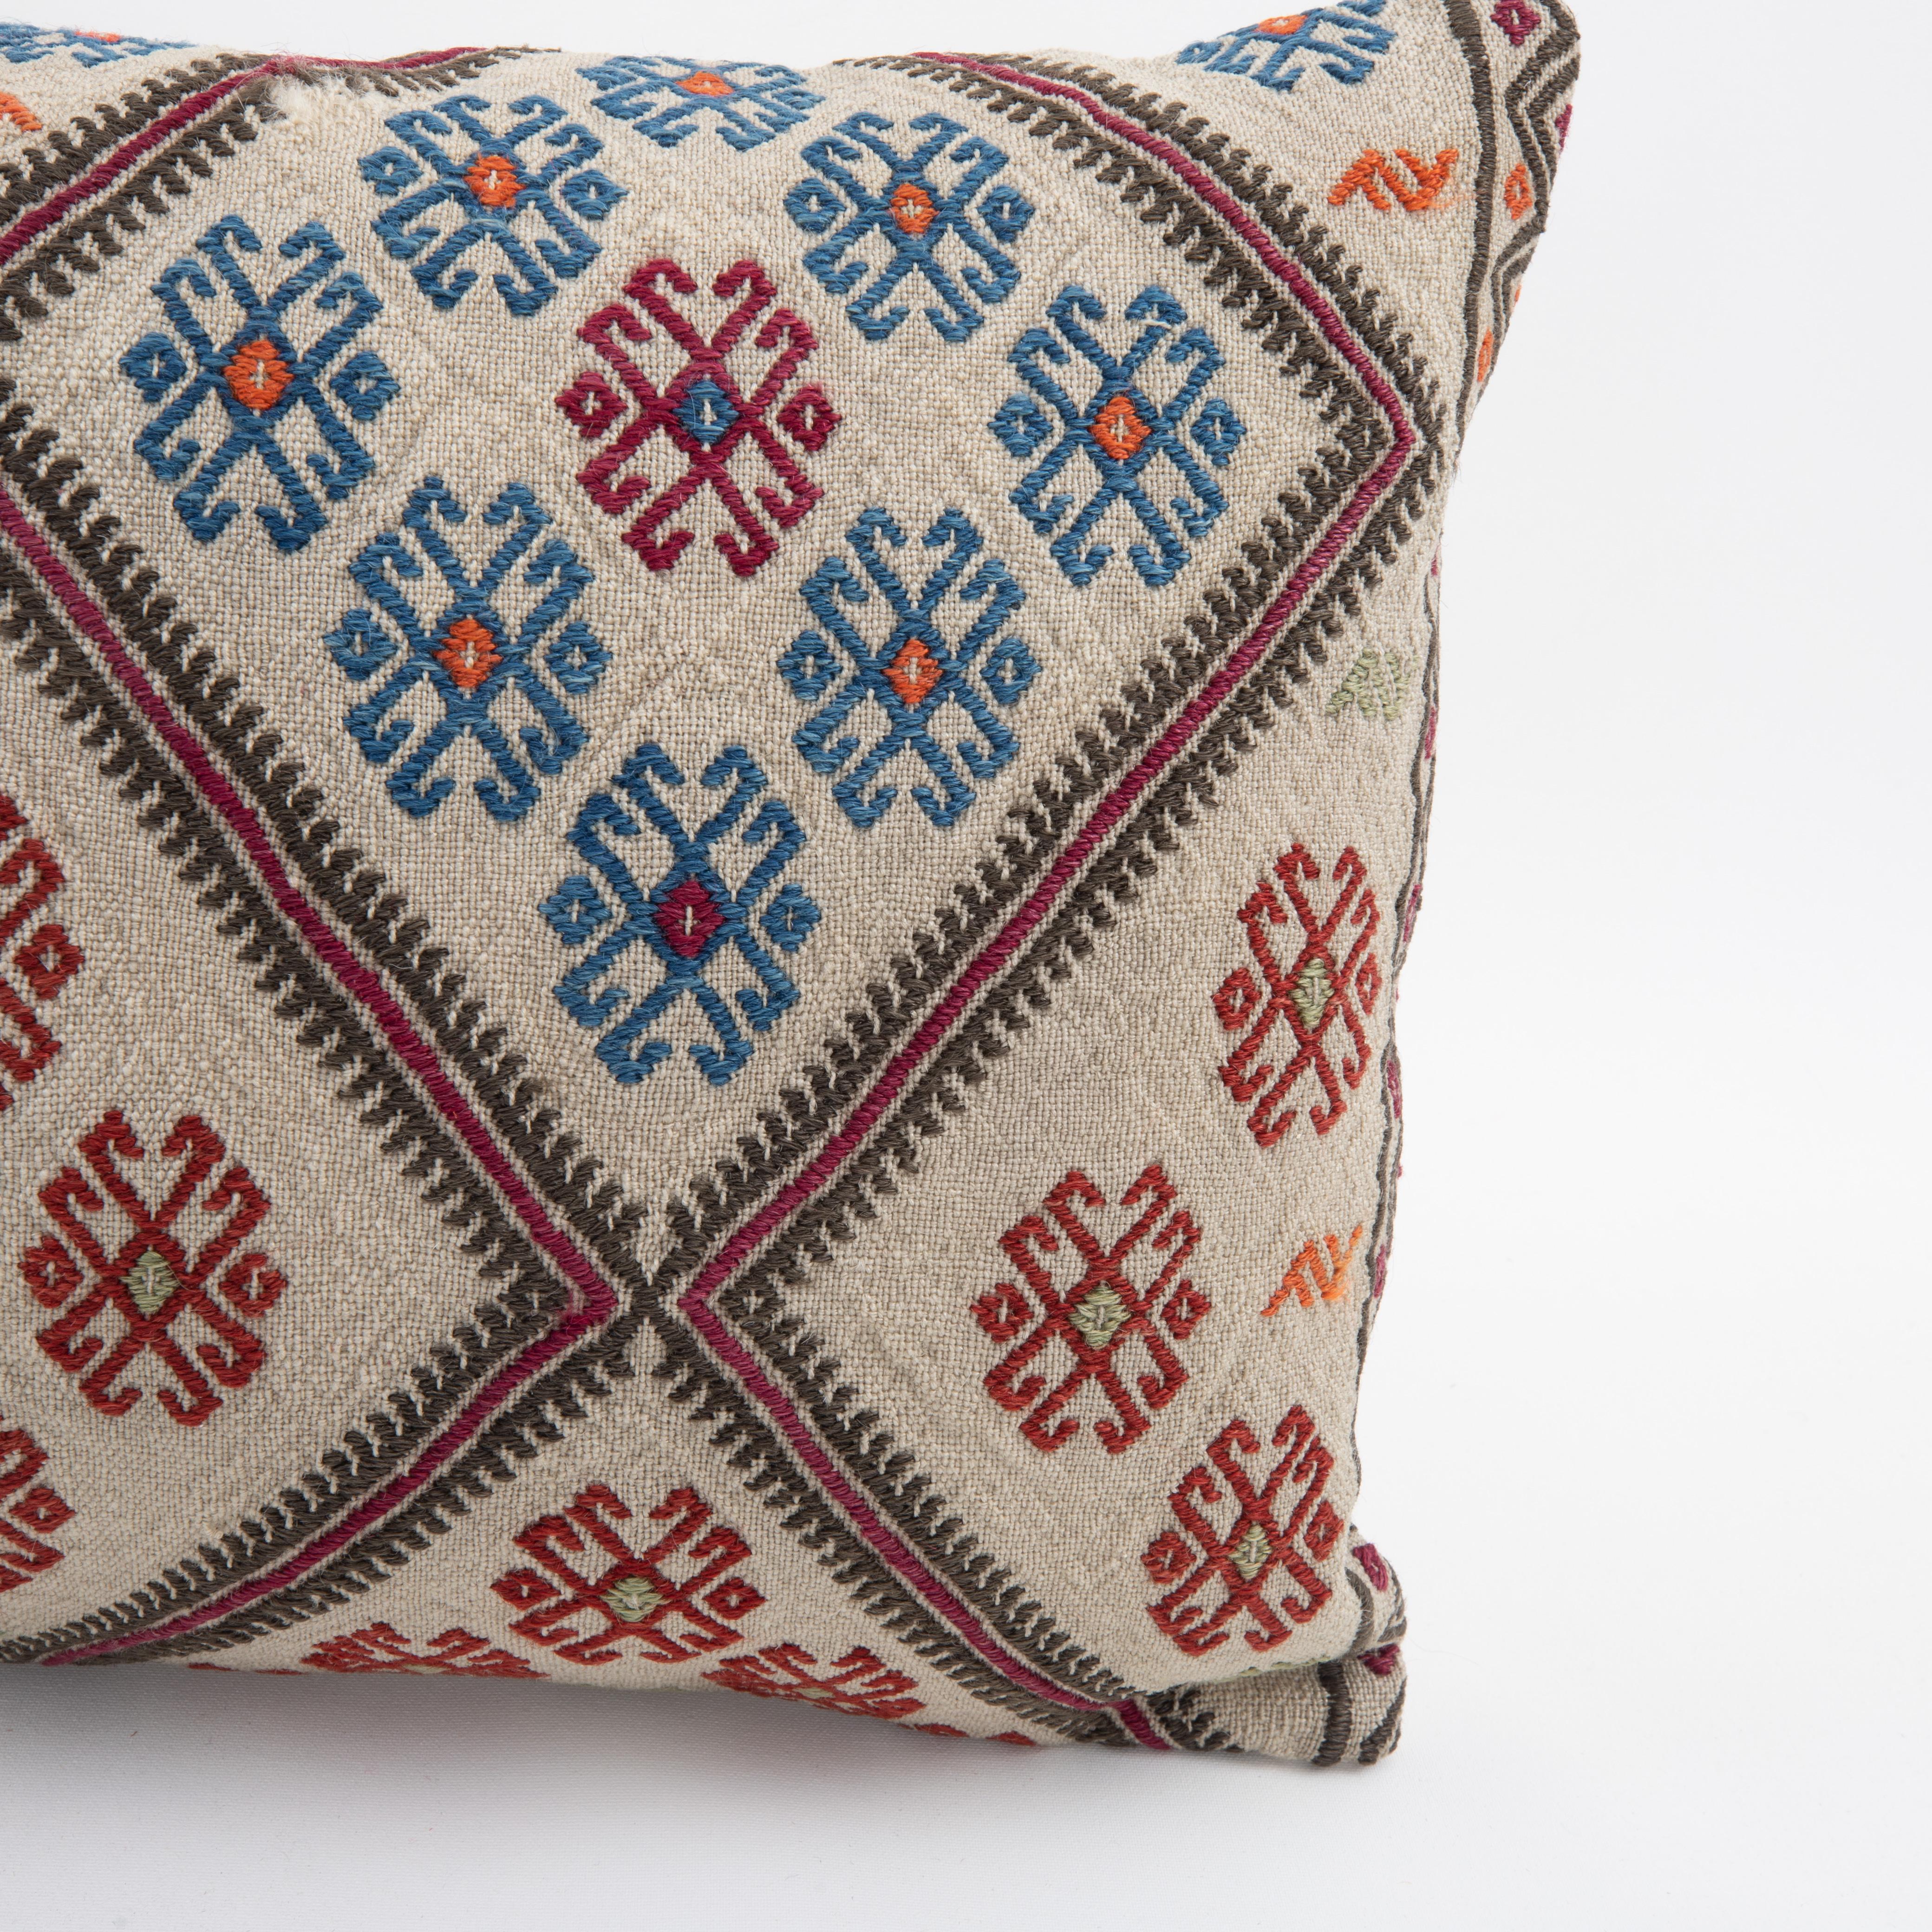 Turkish Pillow Case Made from an Antique Anatolian Cicim Rug